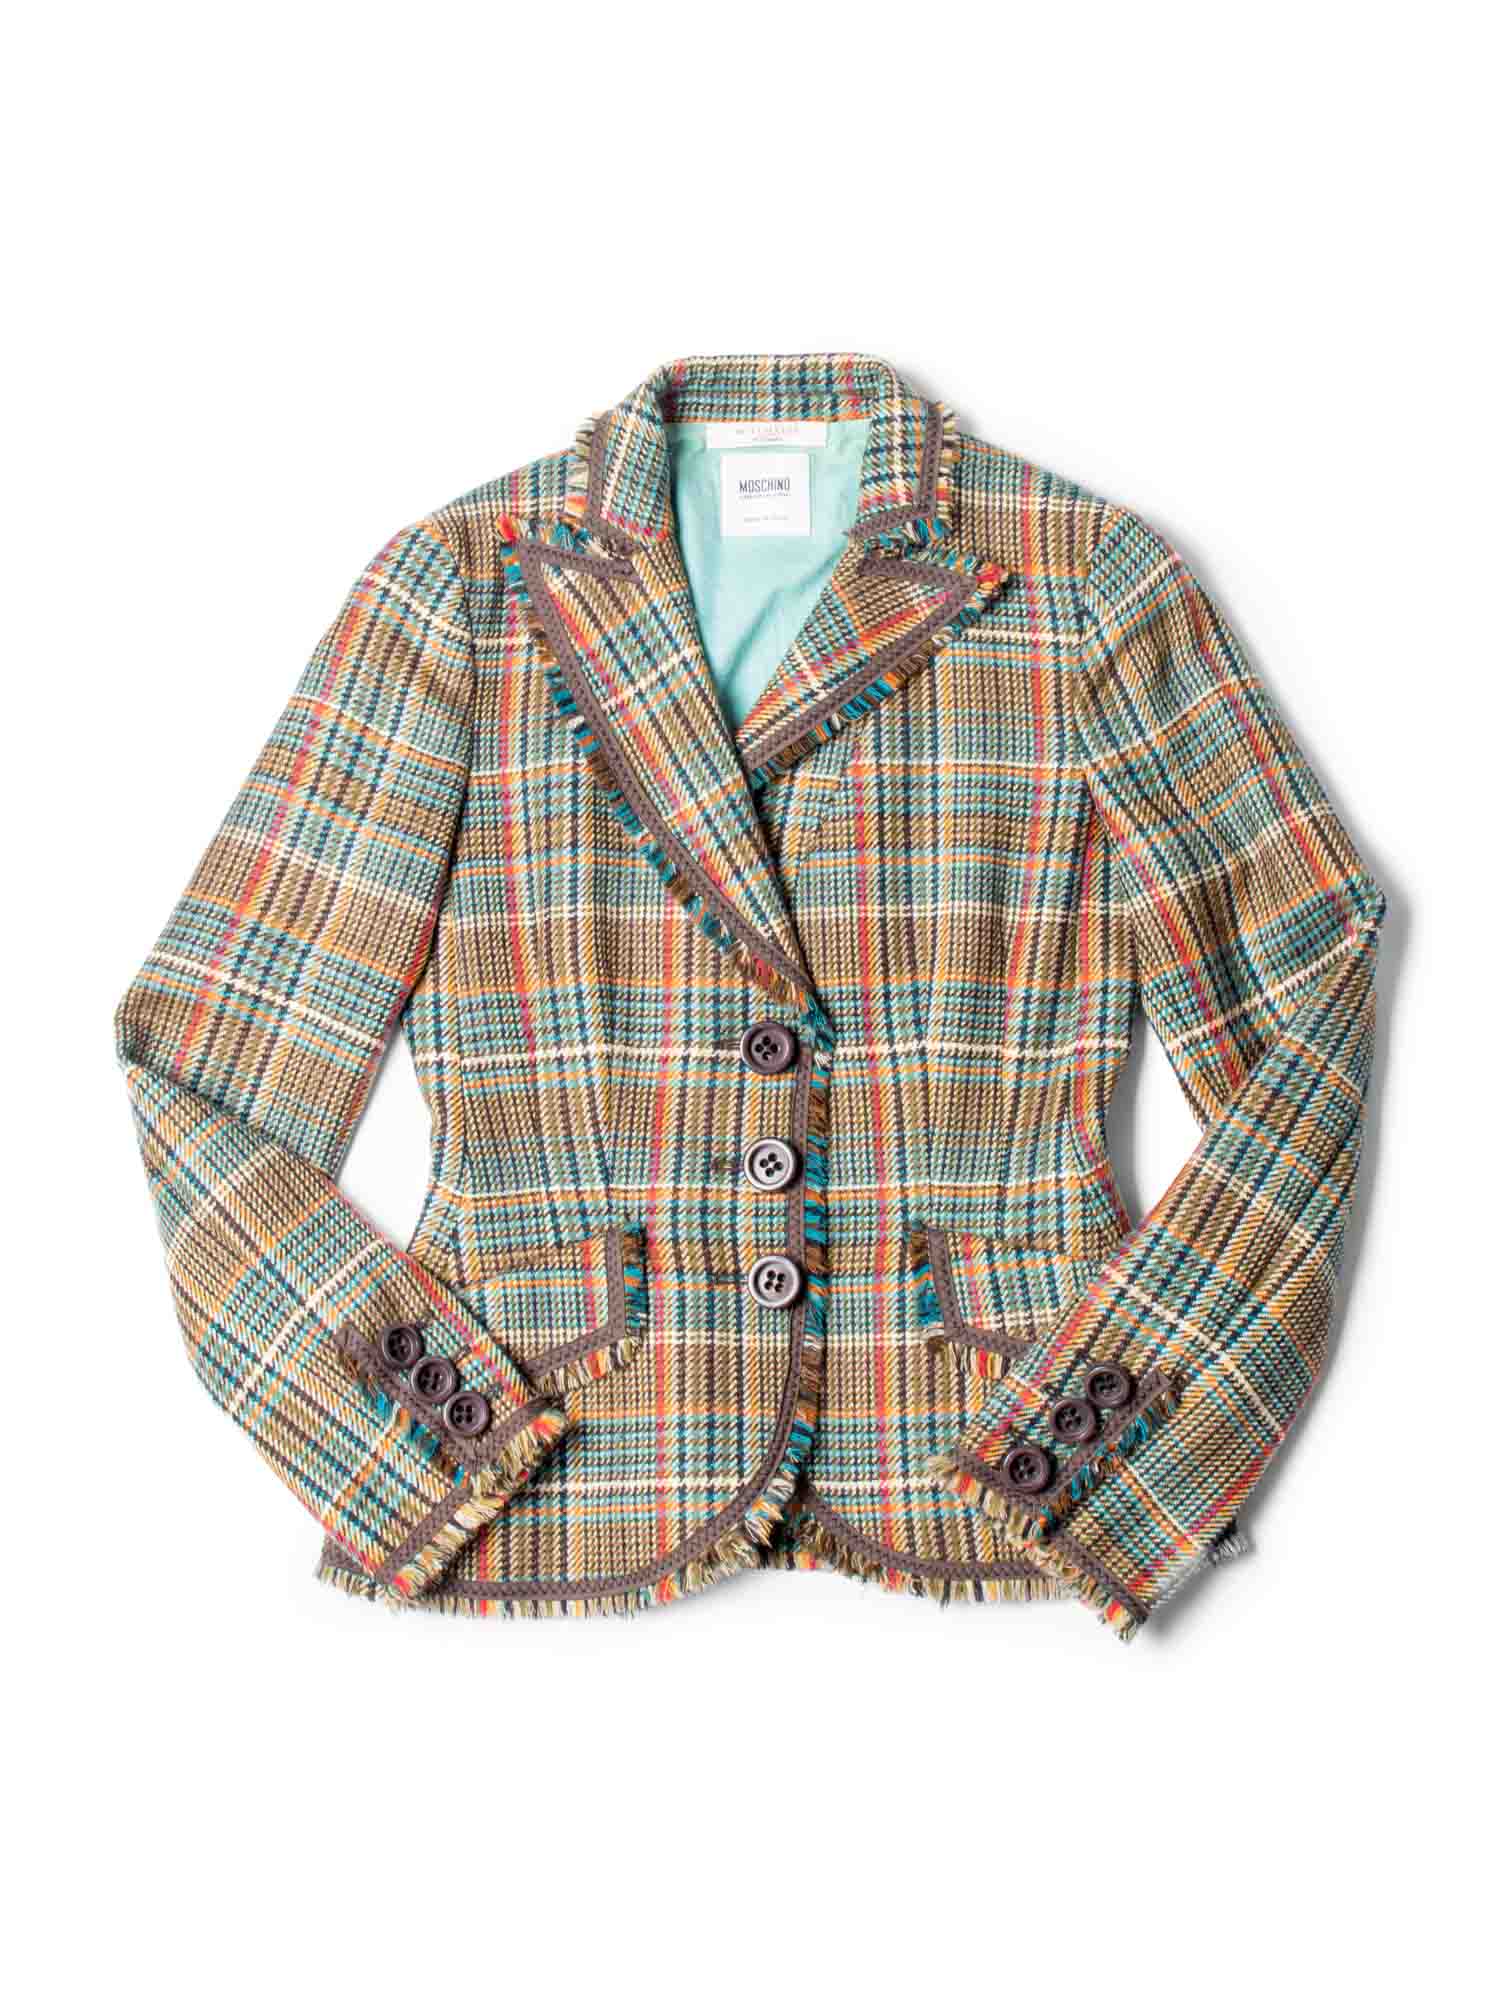 Moschino Wool Plaid Houndstooth Fringe Fitted Jacket Multicolor-designer resale